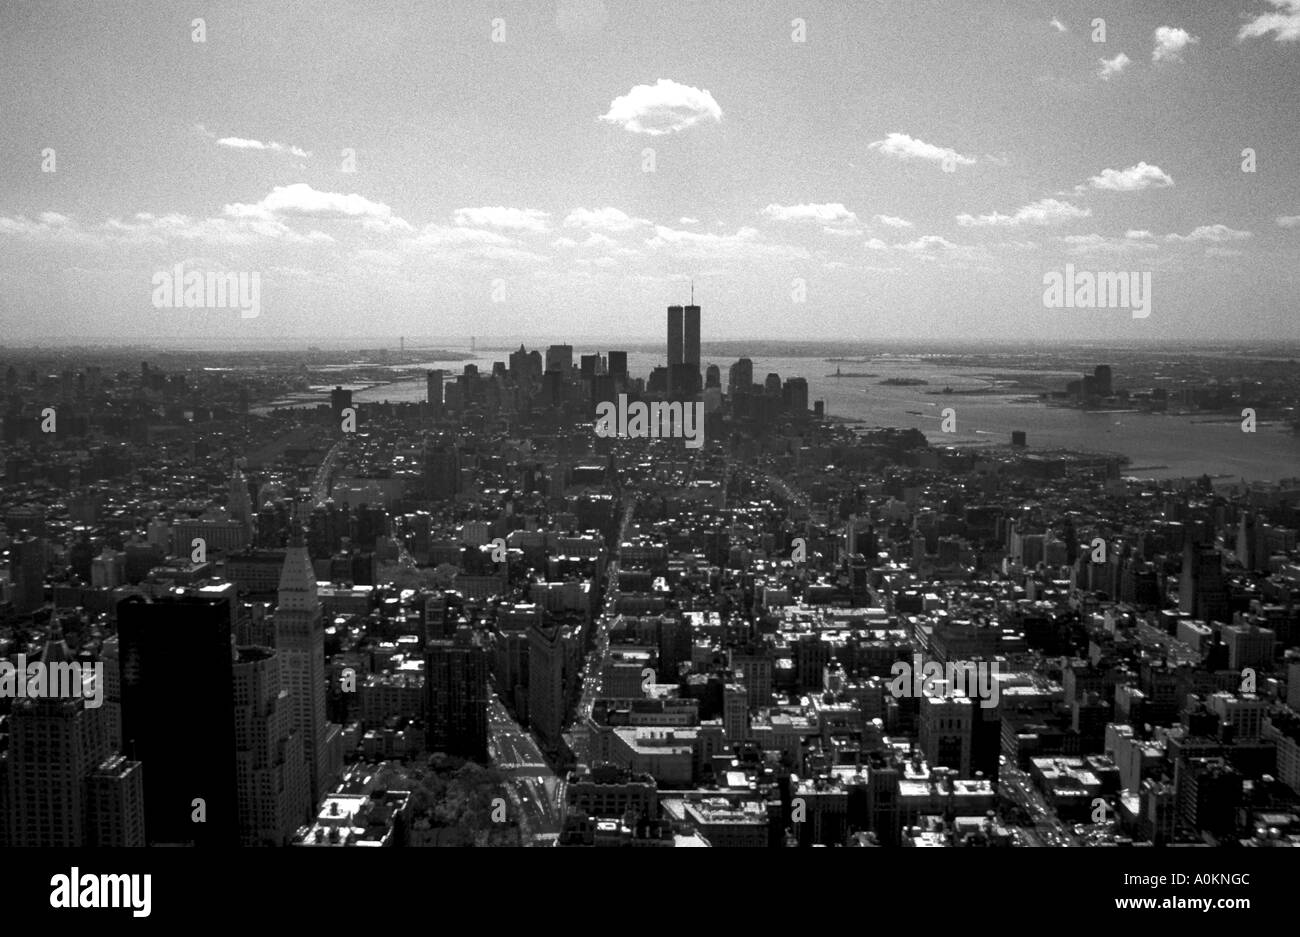 Black and white grainy image of Manhattan, New York taken from Empire state building towards the twin towers. Stock Photo